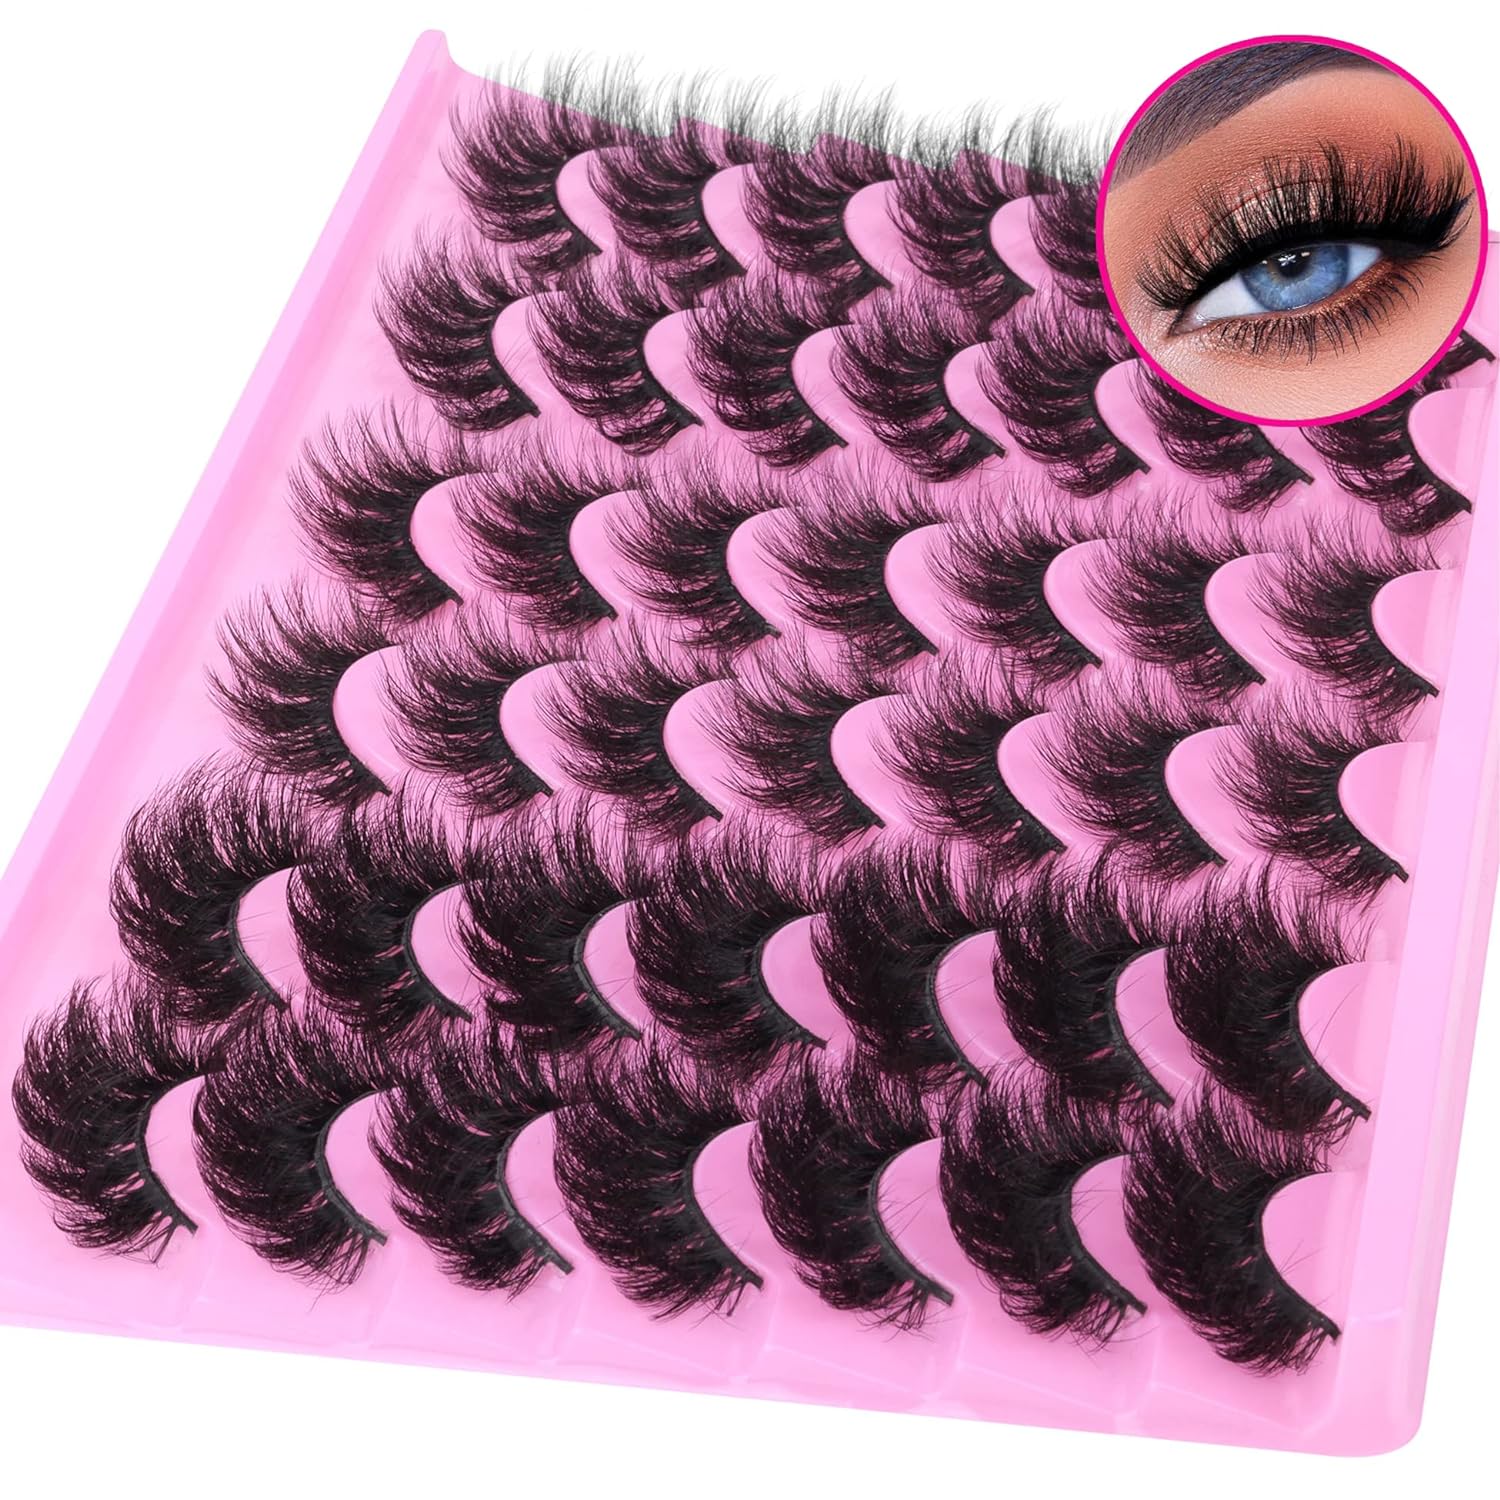 Mink Lashes Fluffy False Eyelashes Natural Look 14-17mm Cat Eye Lashes Pack, 5D Wispy Curly Fake Lashes by TNFVLONEINS - 21 Pairs 3 Styles